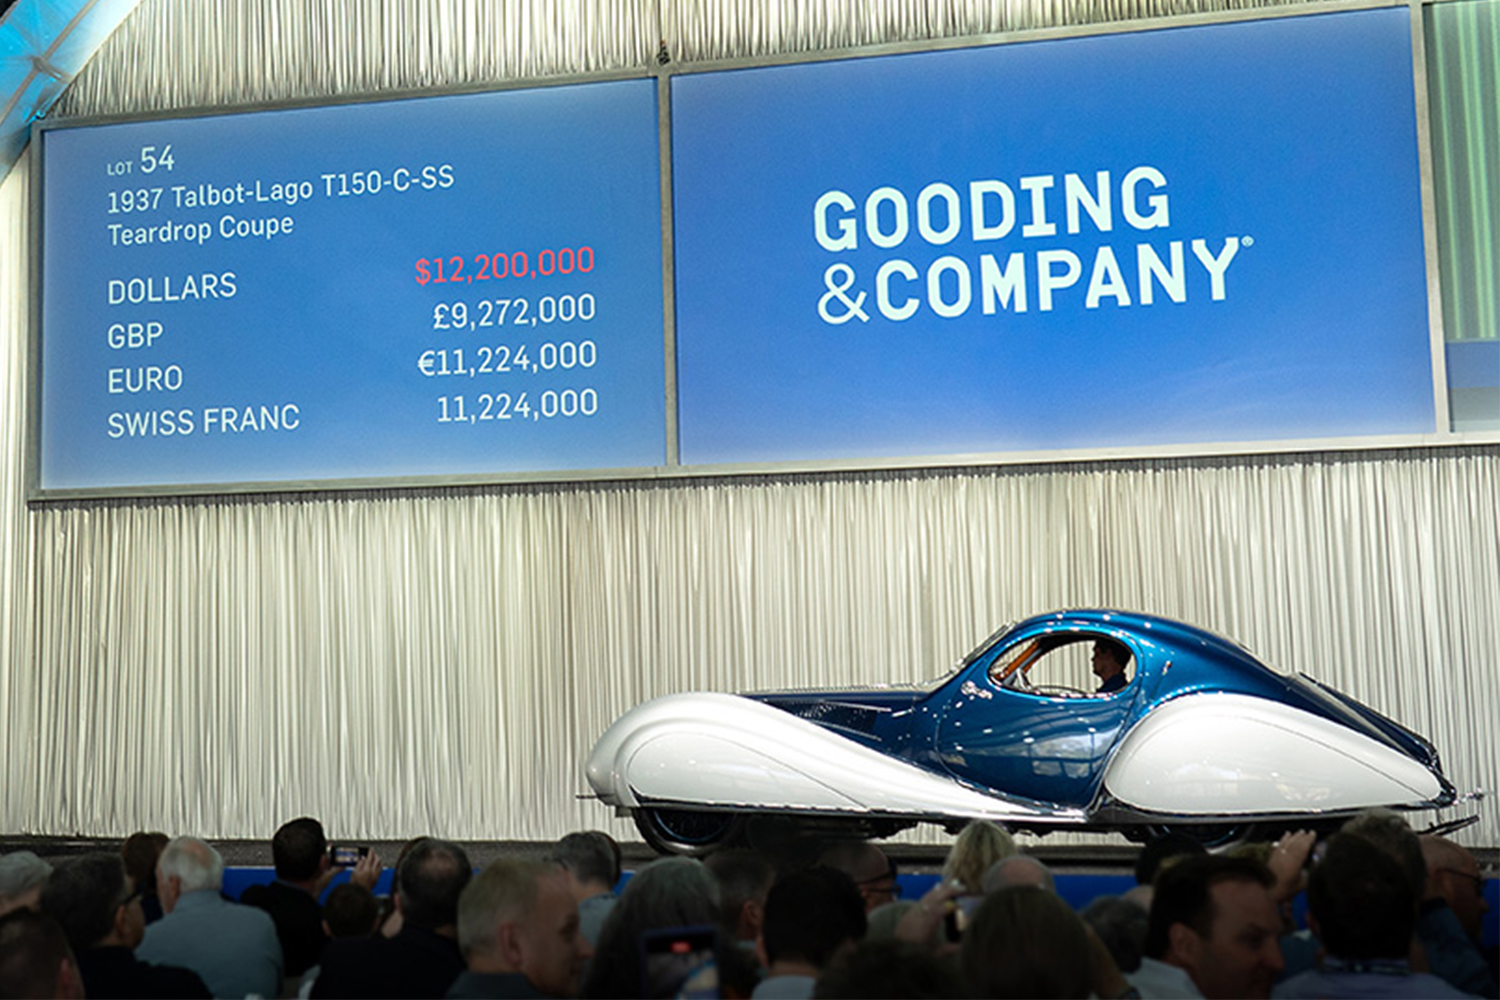 A 1937 Talbot-Lago car on the auction block at Gooding & Company's 2022 Amelia Island sale in March